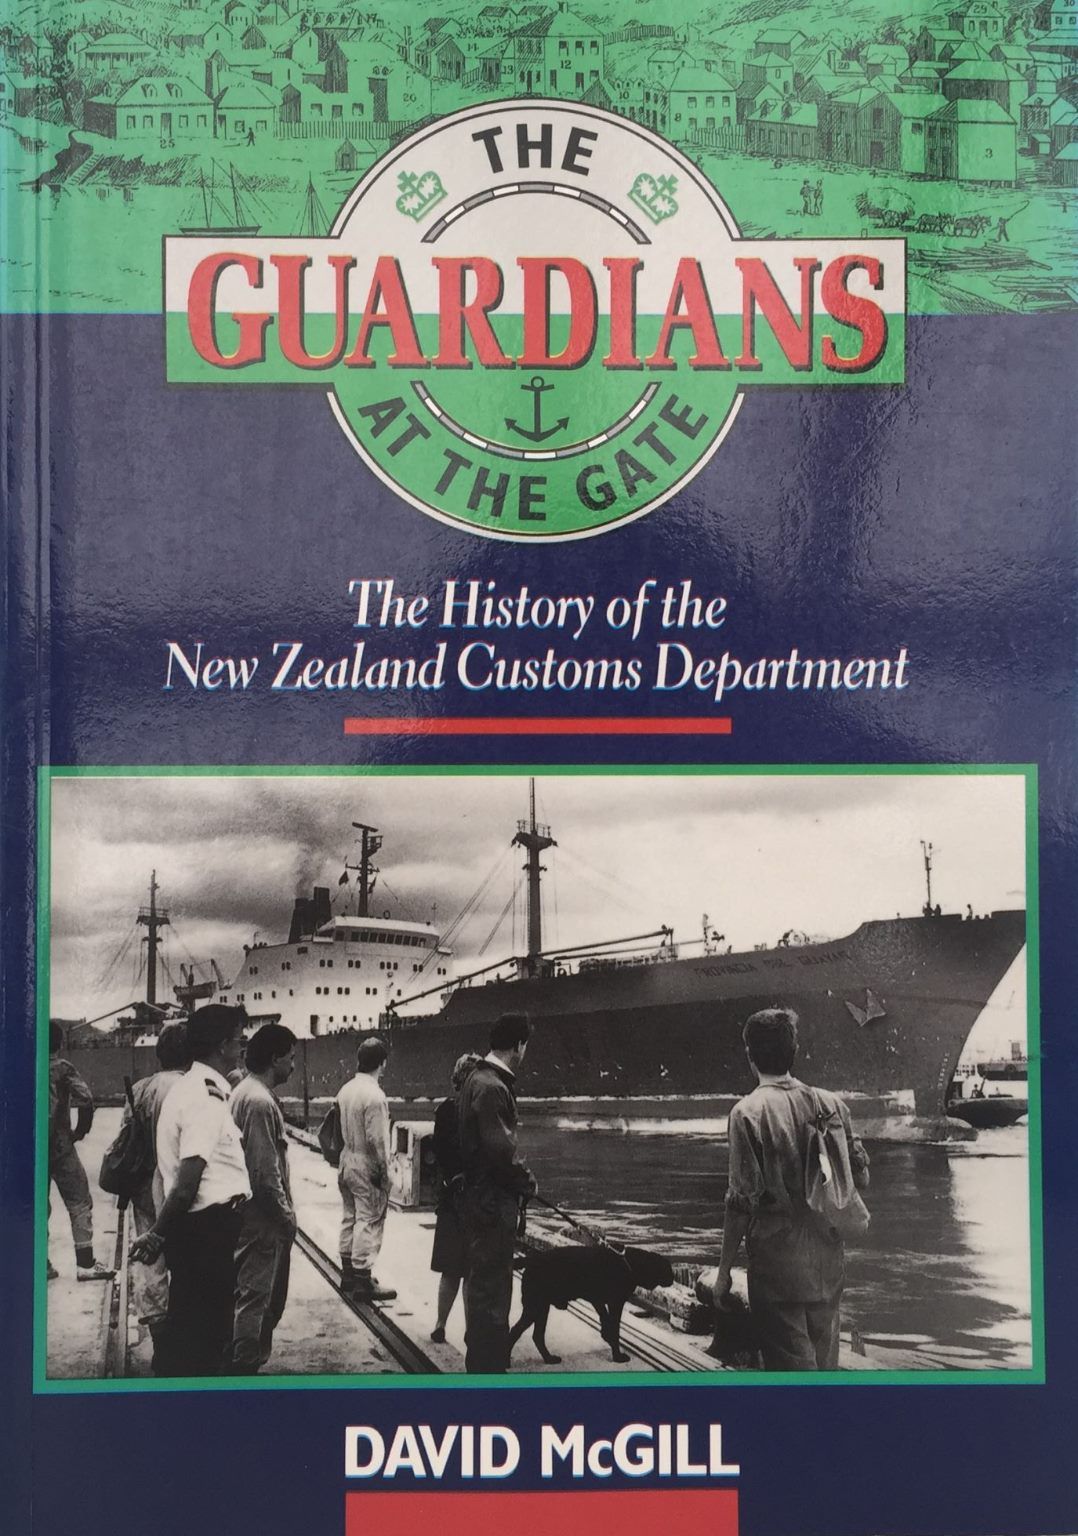 THE GUARDIANS AT THE GATE: History of The New Zealand Customs Department